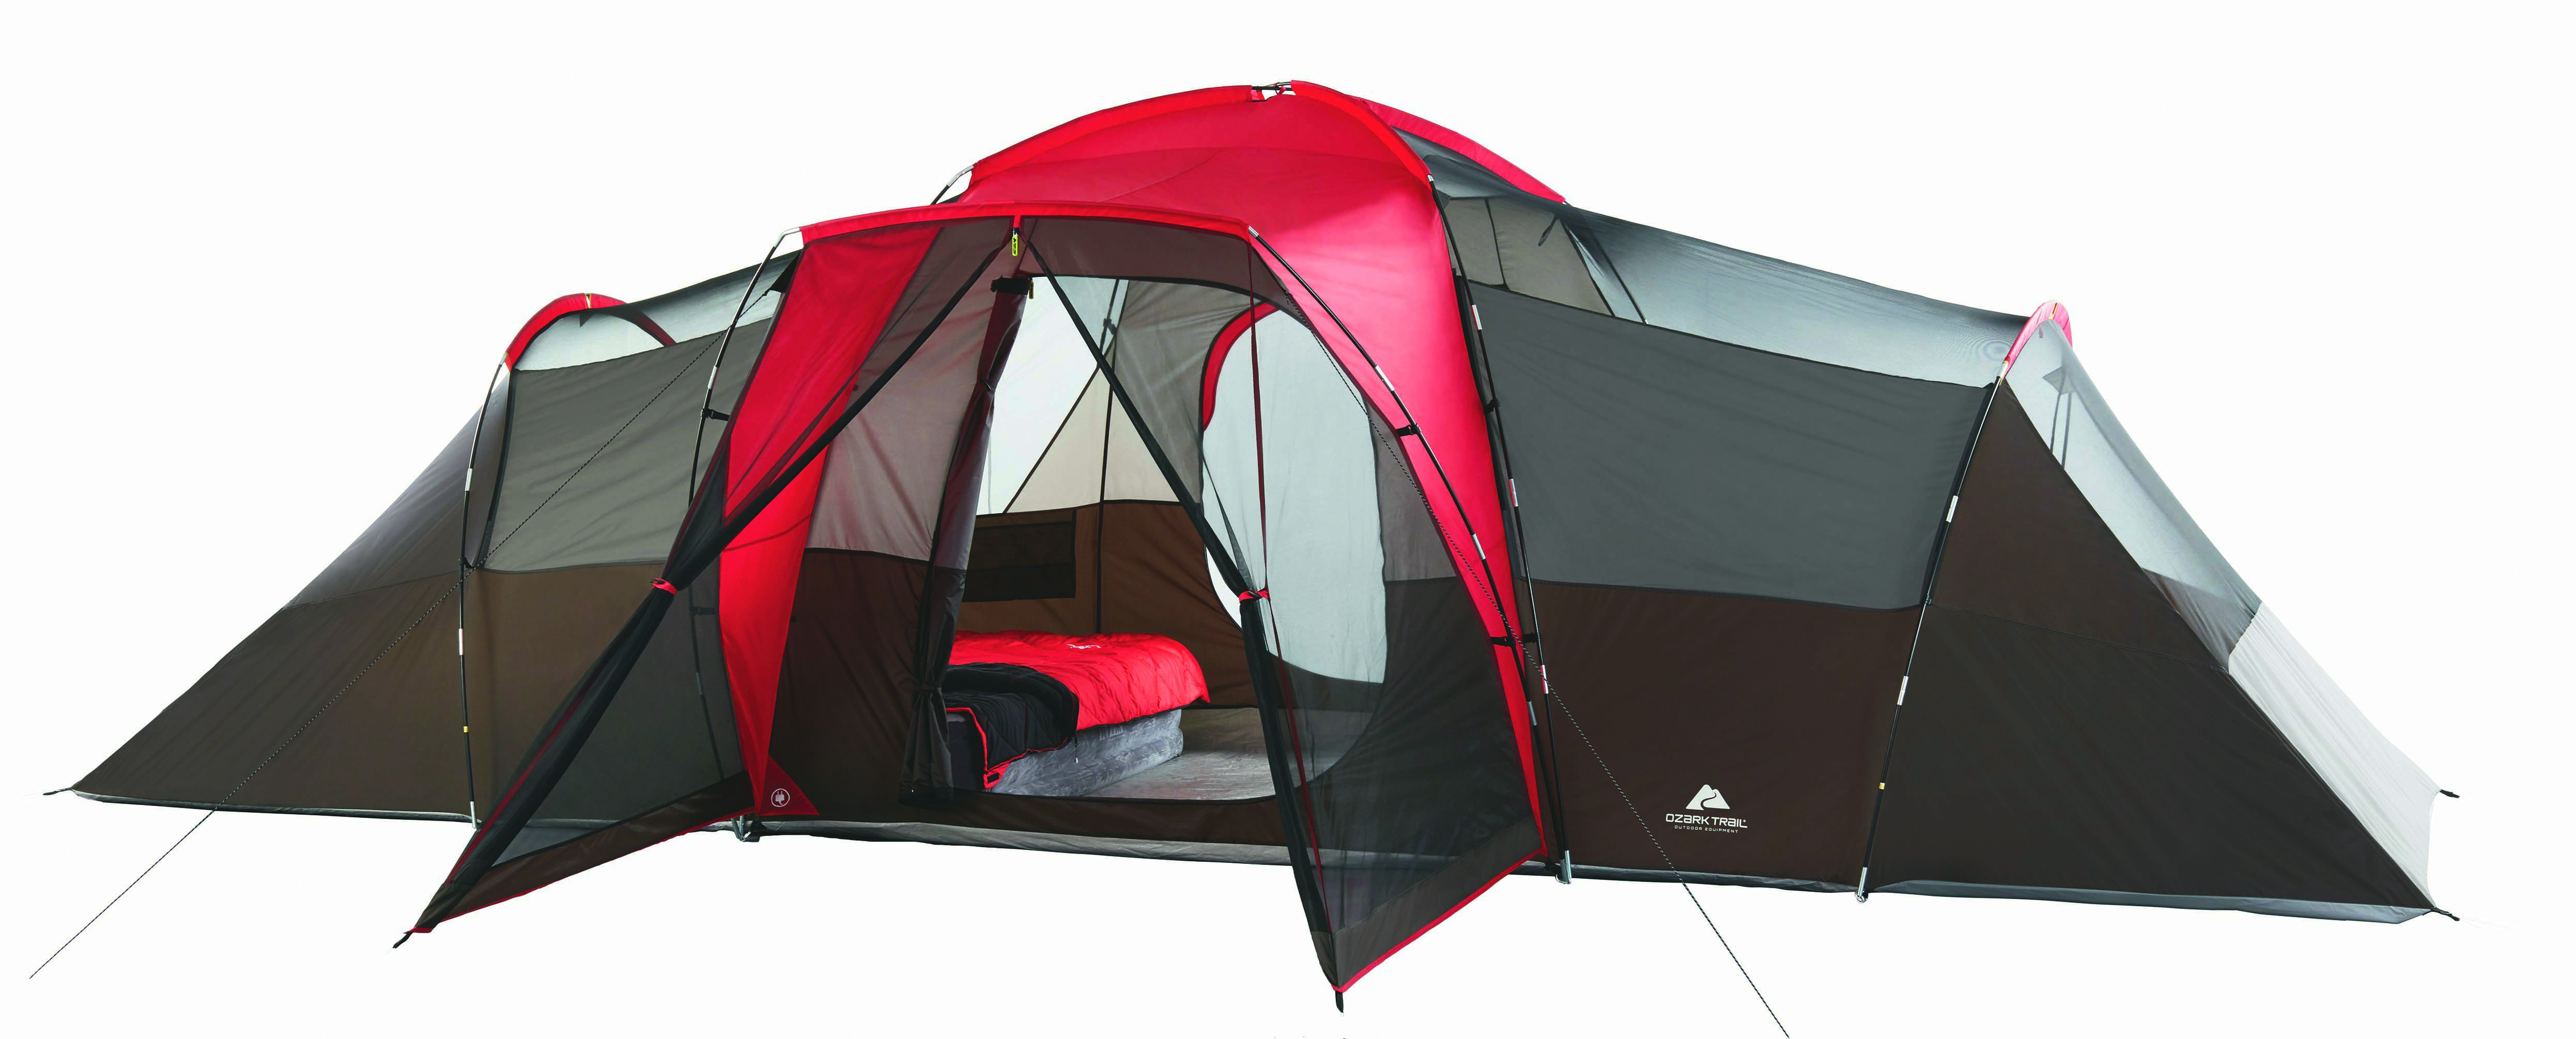 Ozark Trail, 21' x 15' 10-Person Family Camping Tent - image 3 of 11